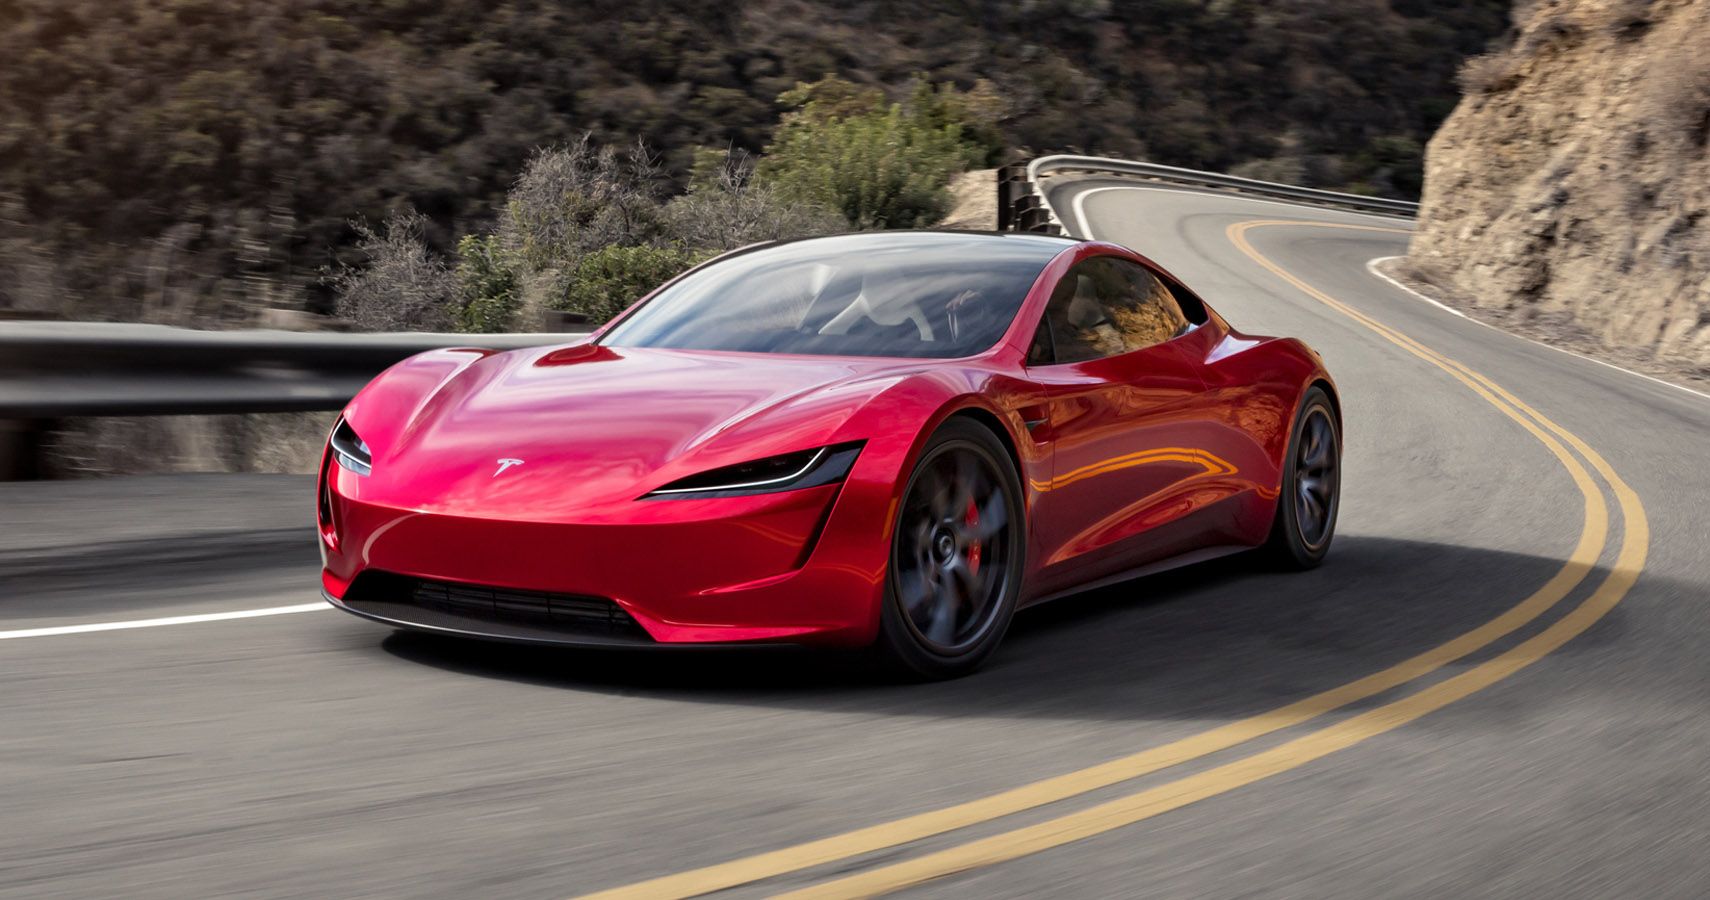 How Fast Is The 2023 Tesla Roadster All-Electric Sports Car